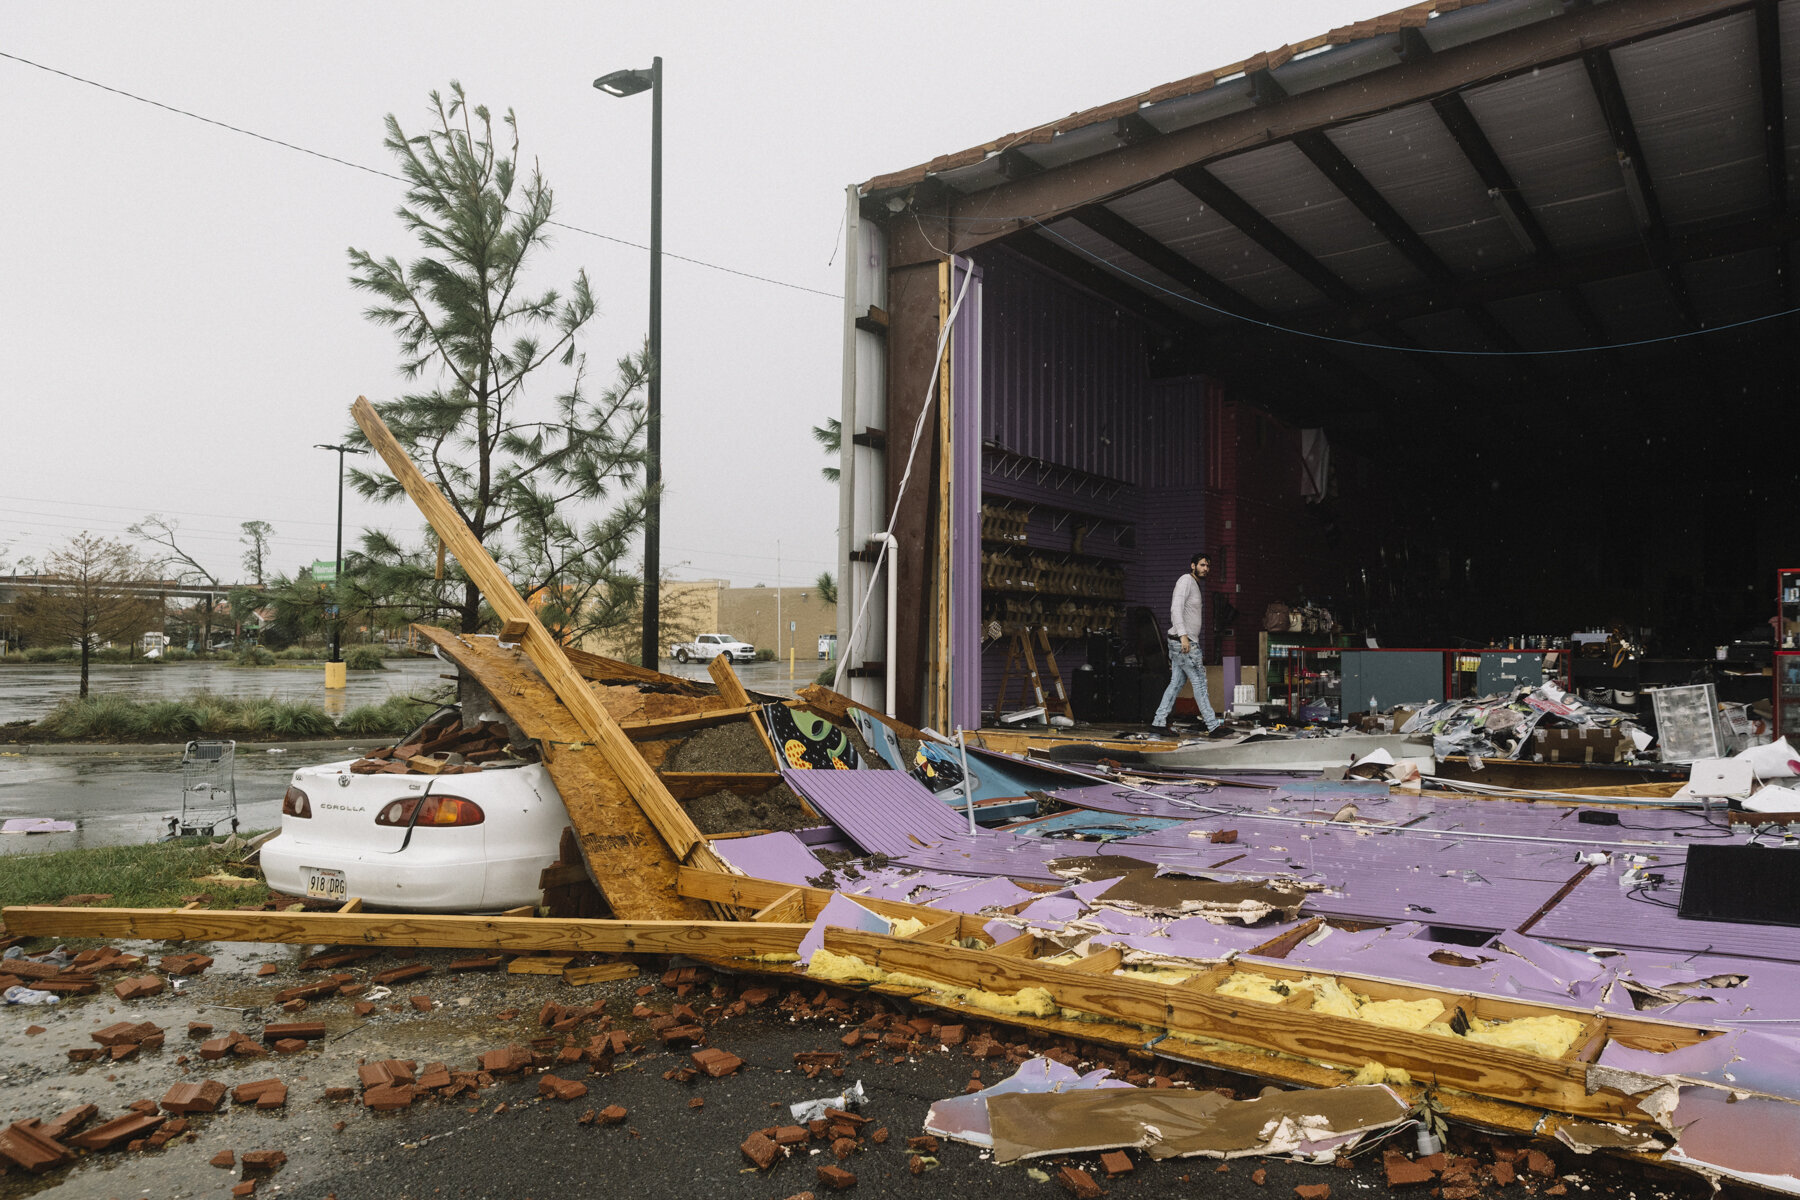  NYTSTORM - Lake Charles, LA - August 28, 2020 - The entire front wall of a beauty supply shop collapsed when the hurricane passed through town.Hurricane Laura's high winds and storm surge had a devastating impact on downtown Lake Charles and the sur